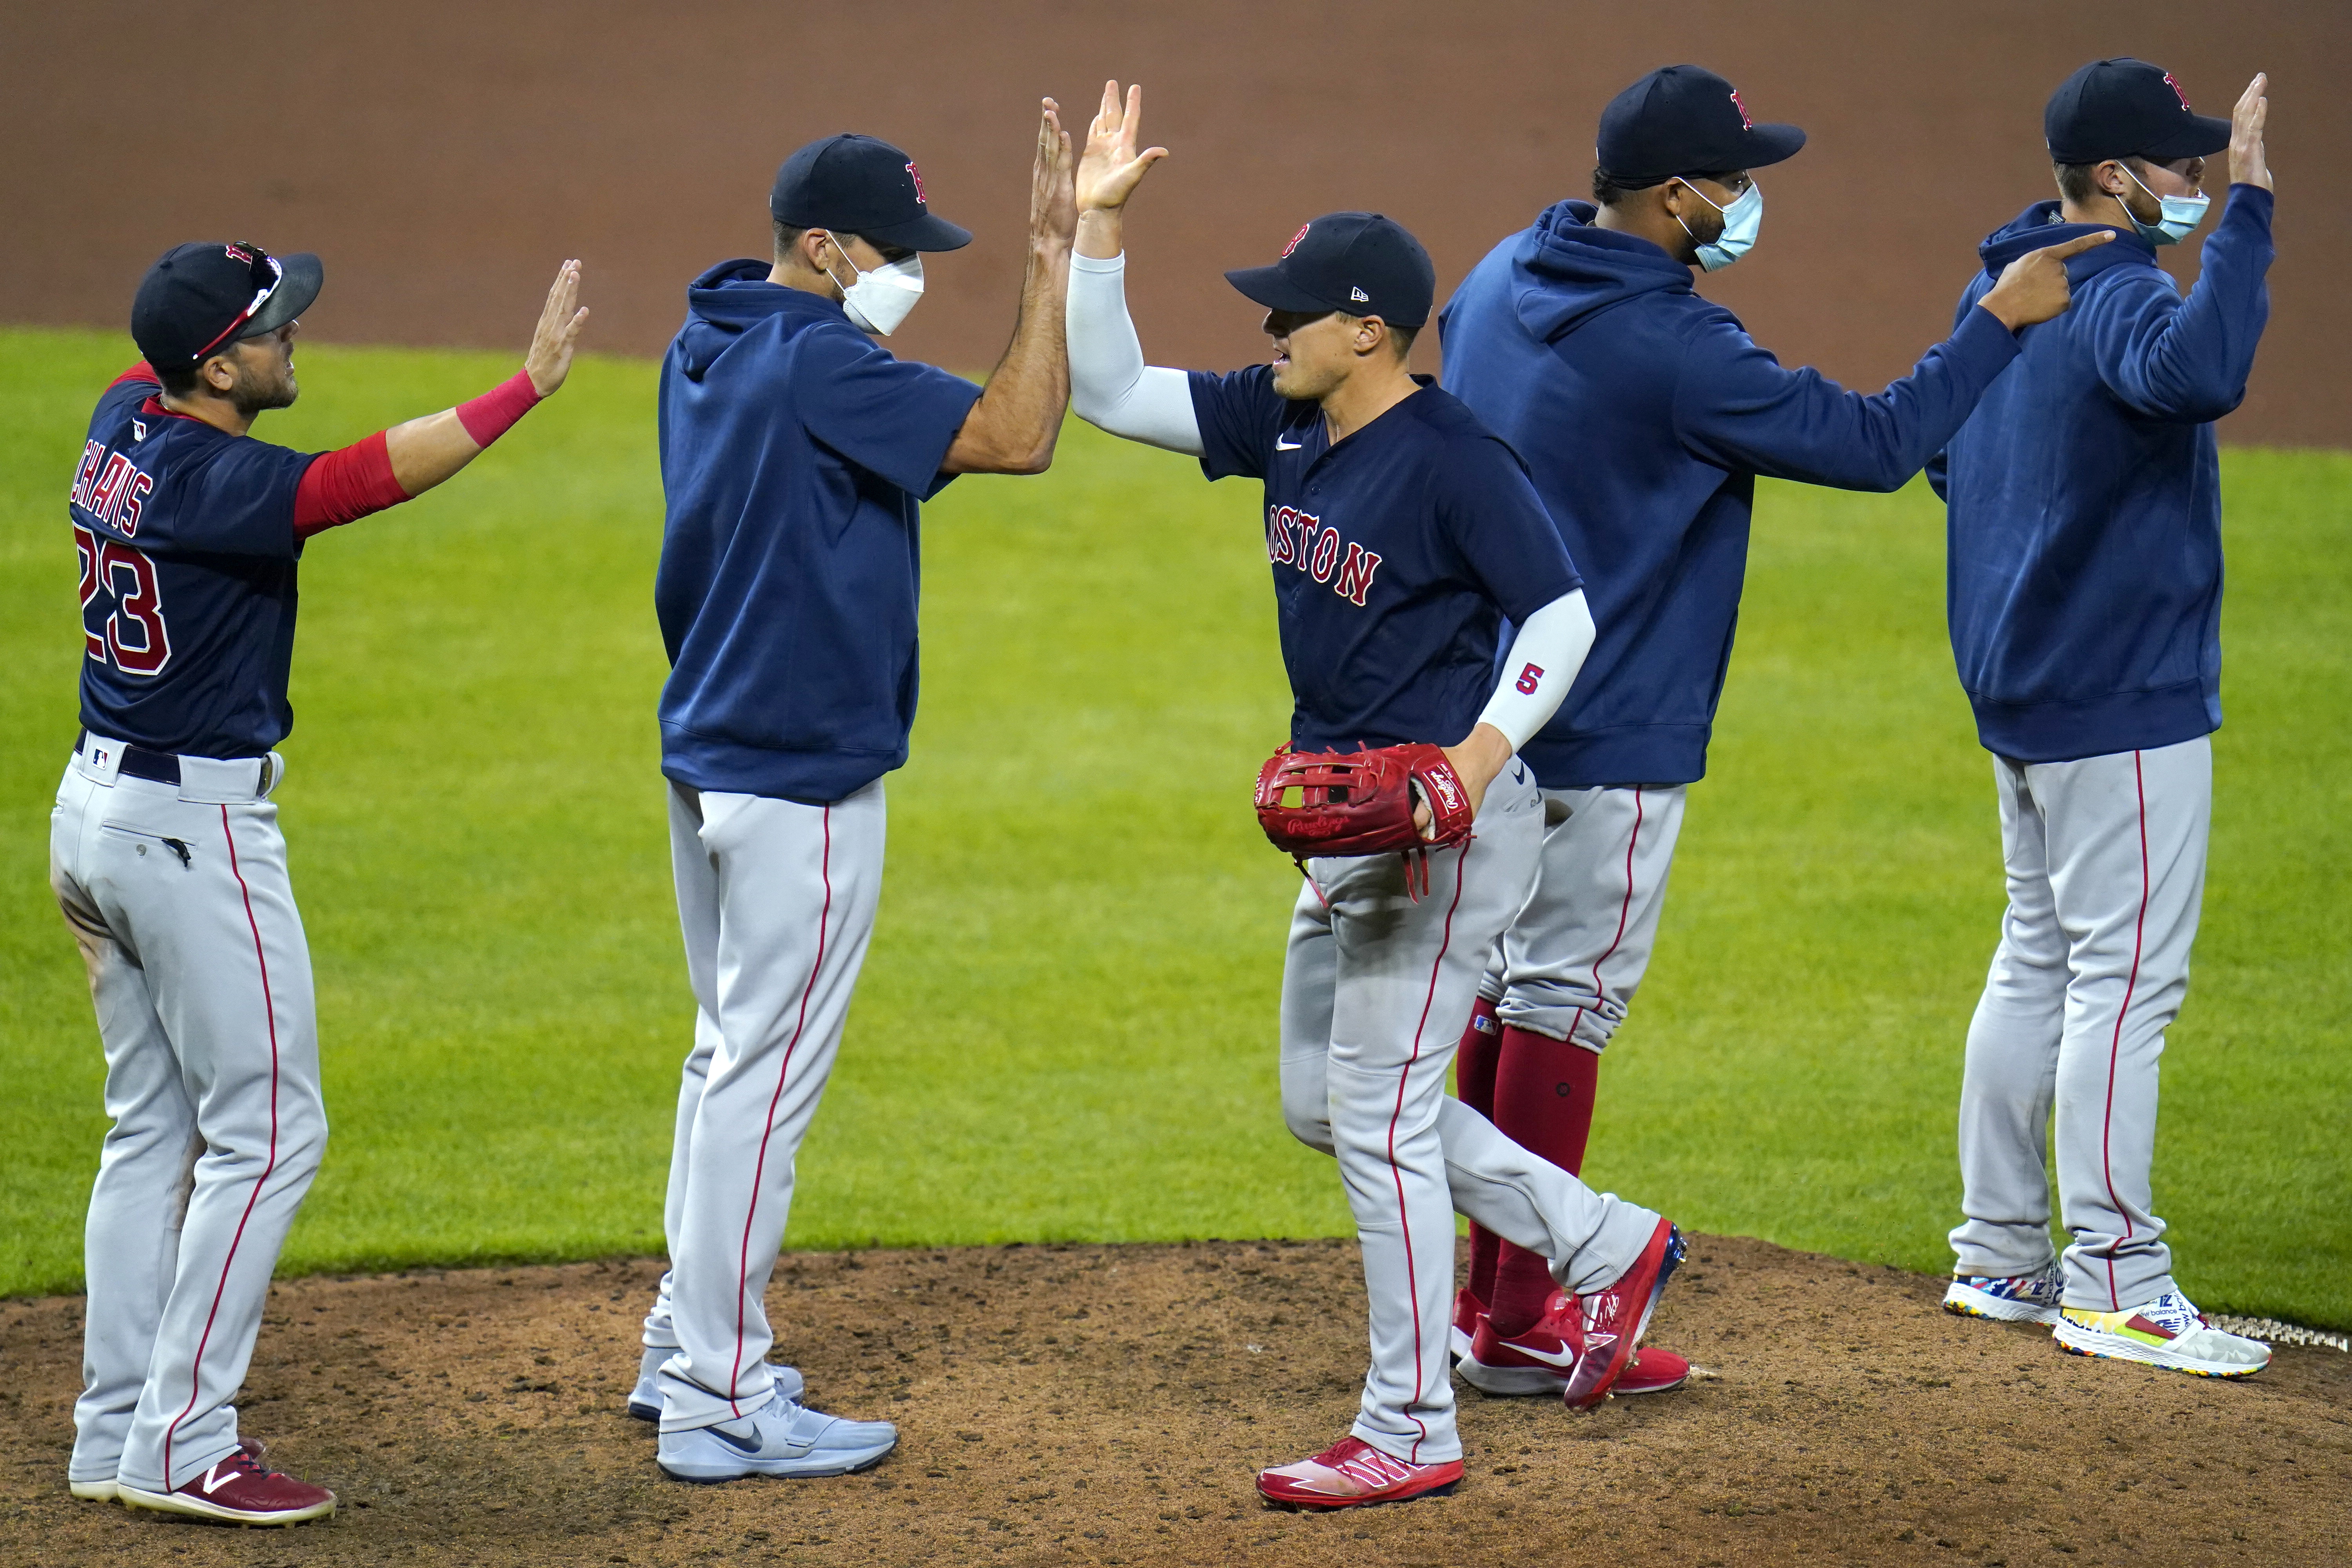 Alex Cora made Red Sox pitcher emotional after apology for role in